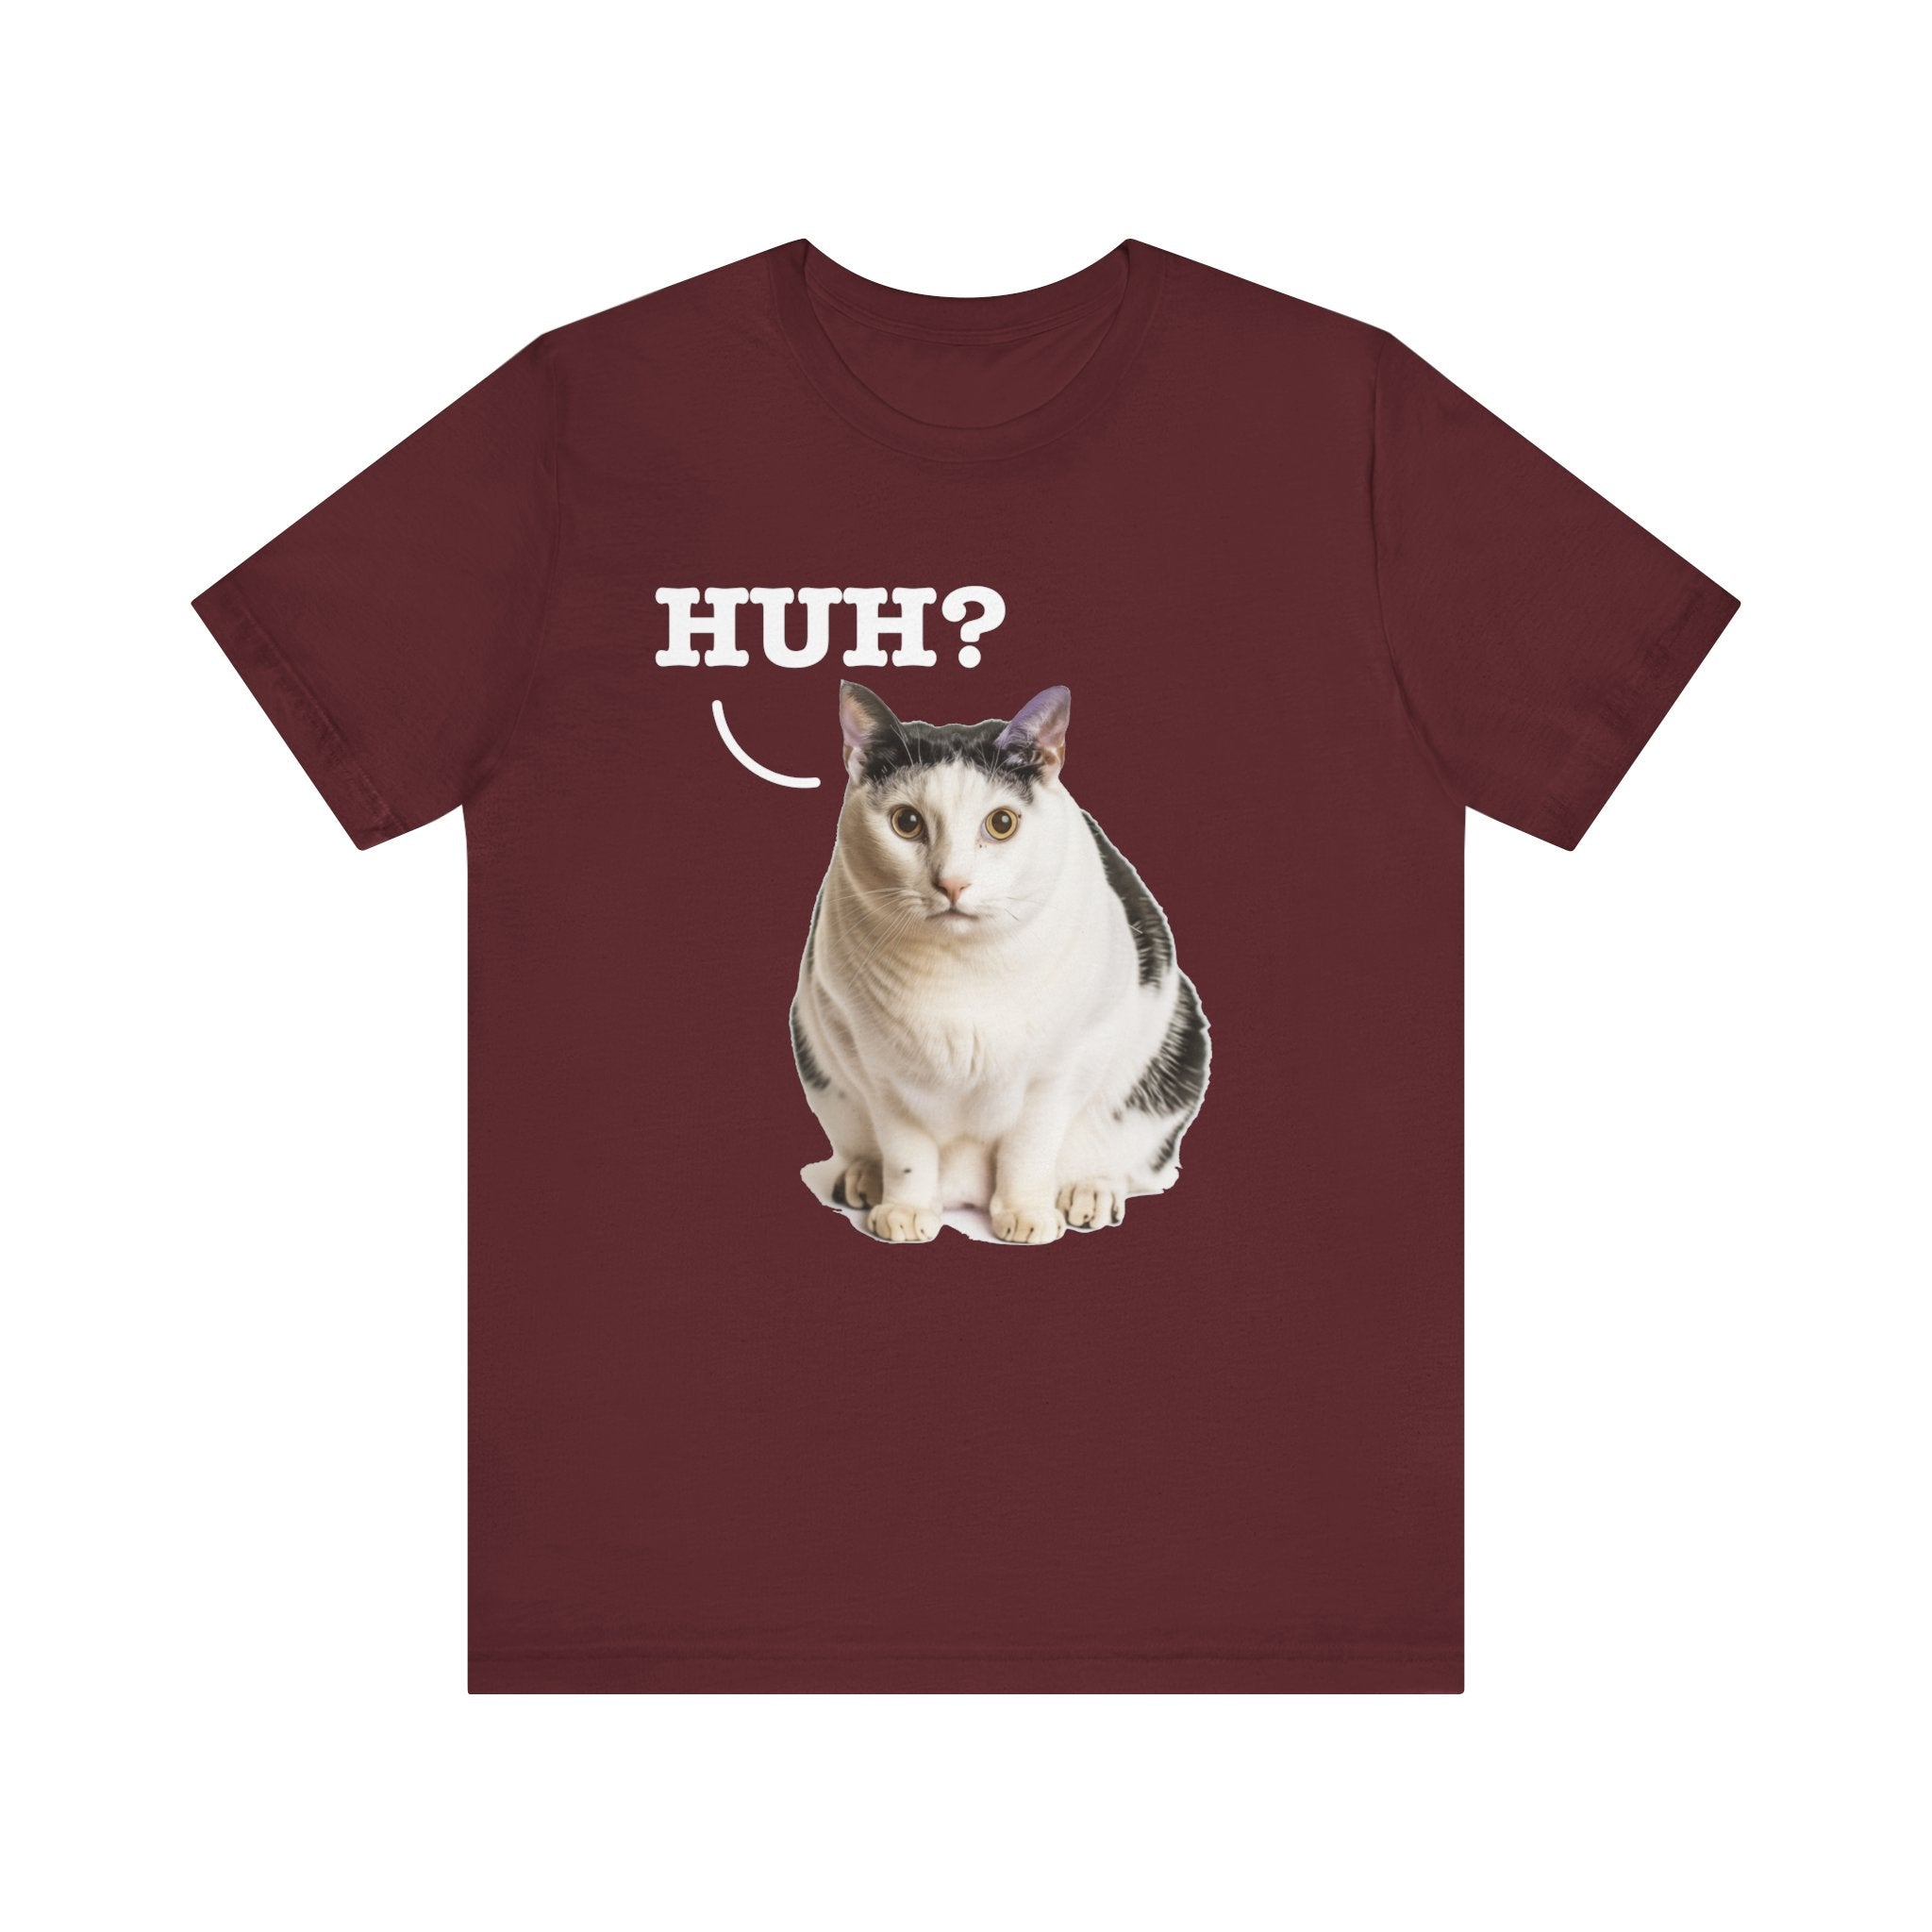 Huh? Cat Meme T-Shirt – Original Art Cat Lover Tee, Unique and Fun - Classic Unisex Jersey Tee, Soft Cotton, Perfect for Cat Lovers